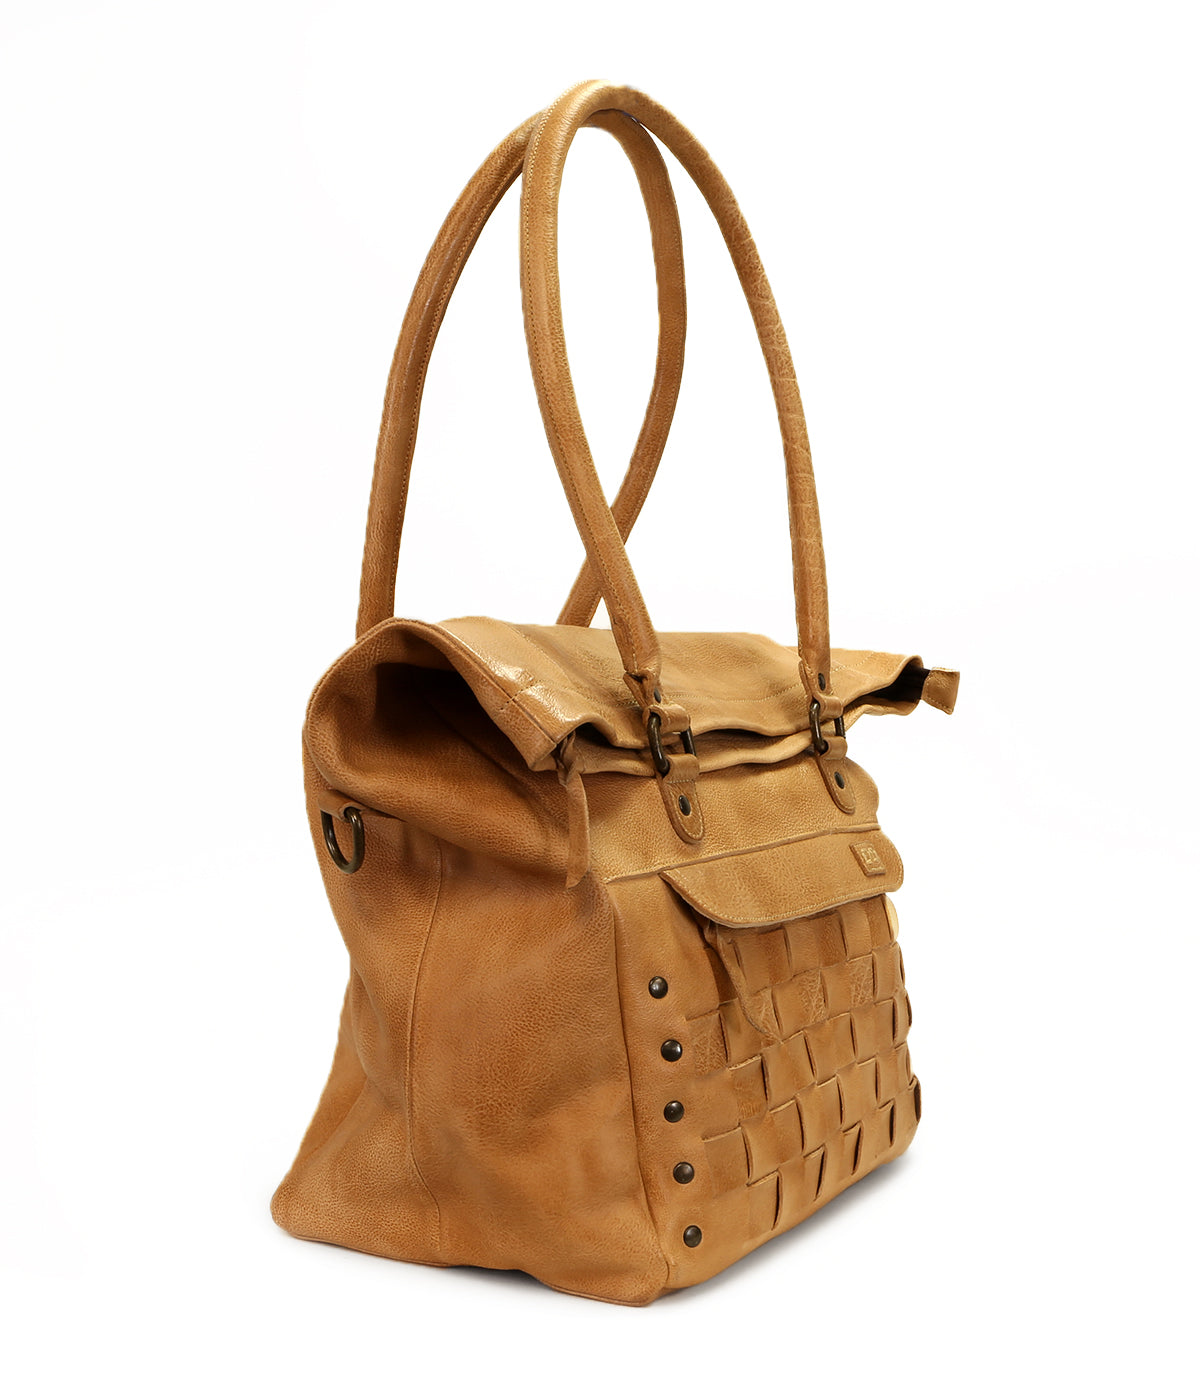 A Miriam handbag by Bed Stu, made of tan leather with handles.